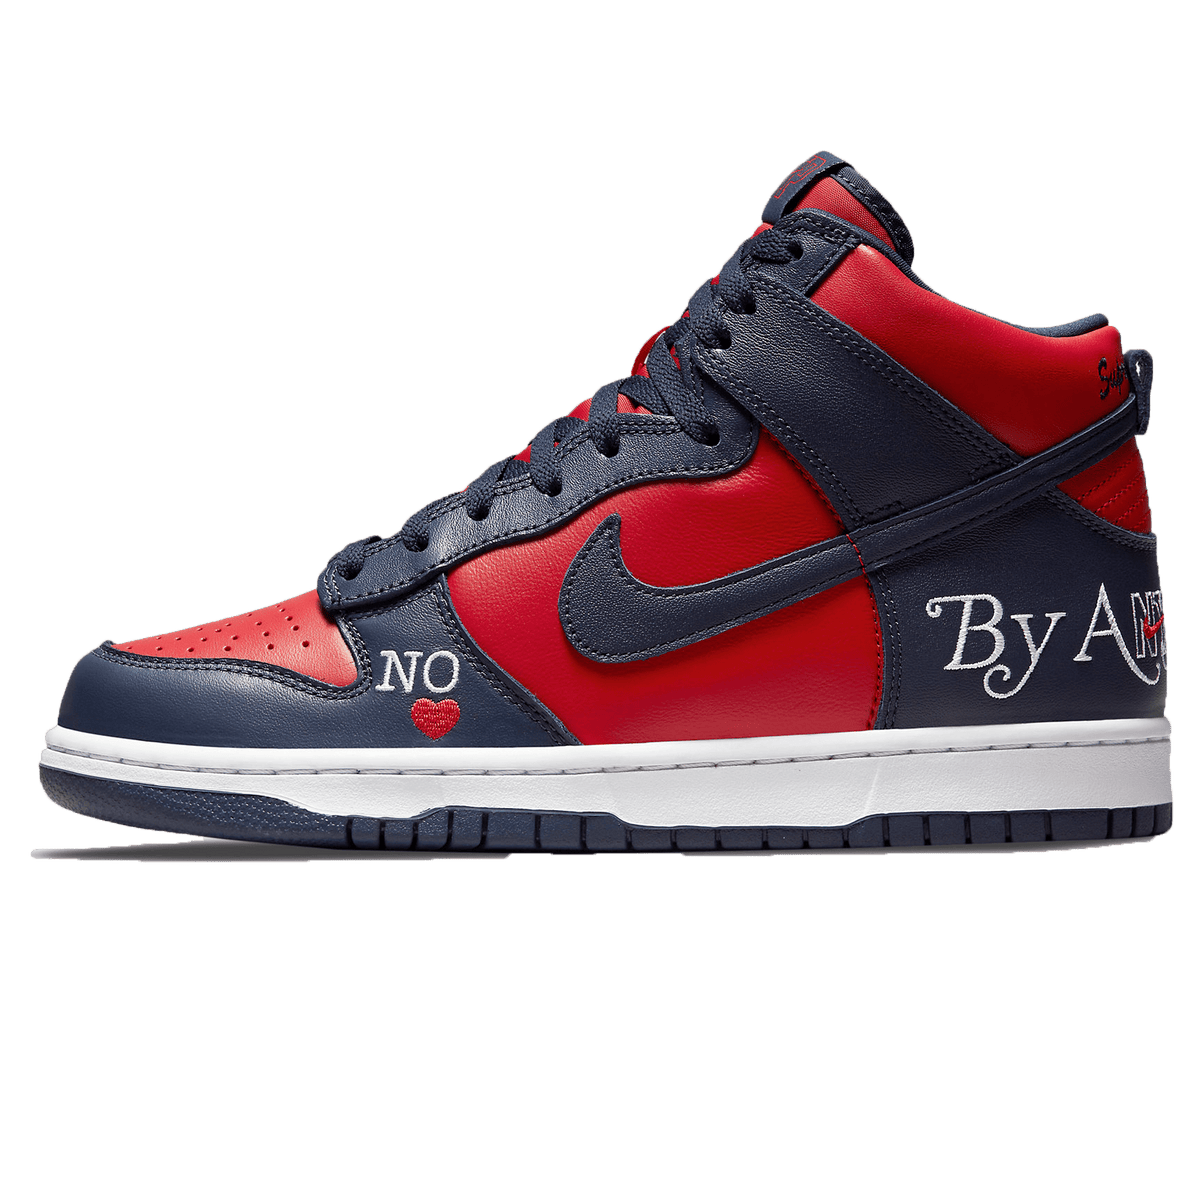 Supreme x Nike hoodies Dunk High SB By Any Means   Red Navy